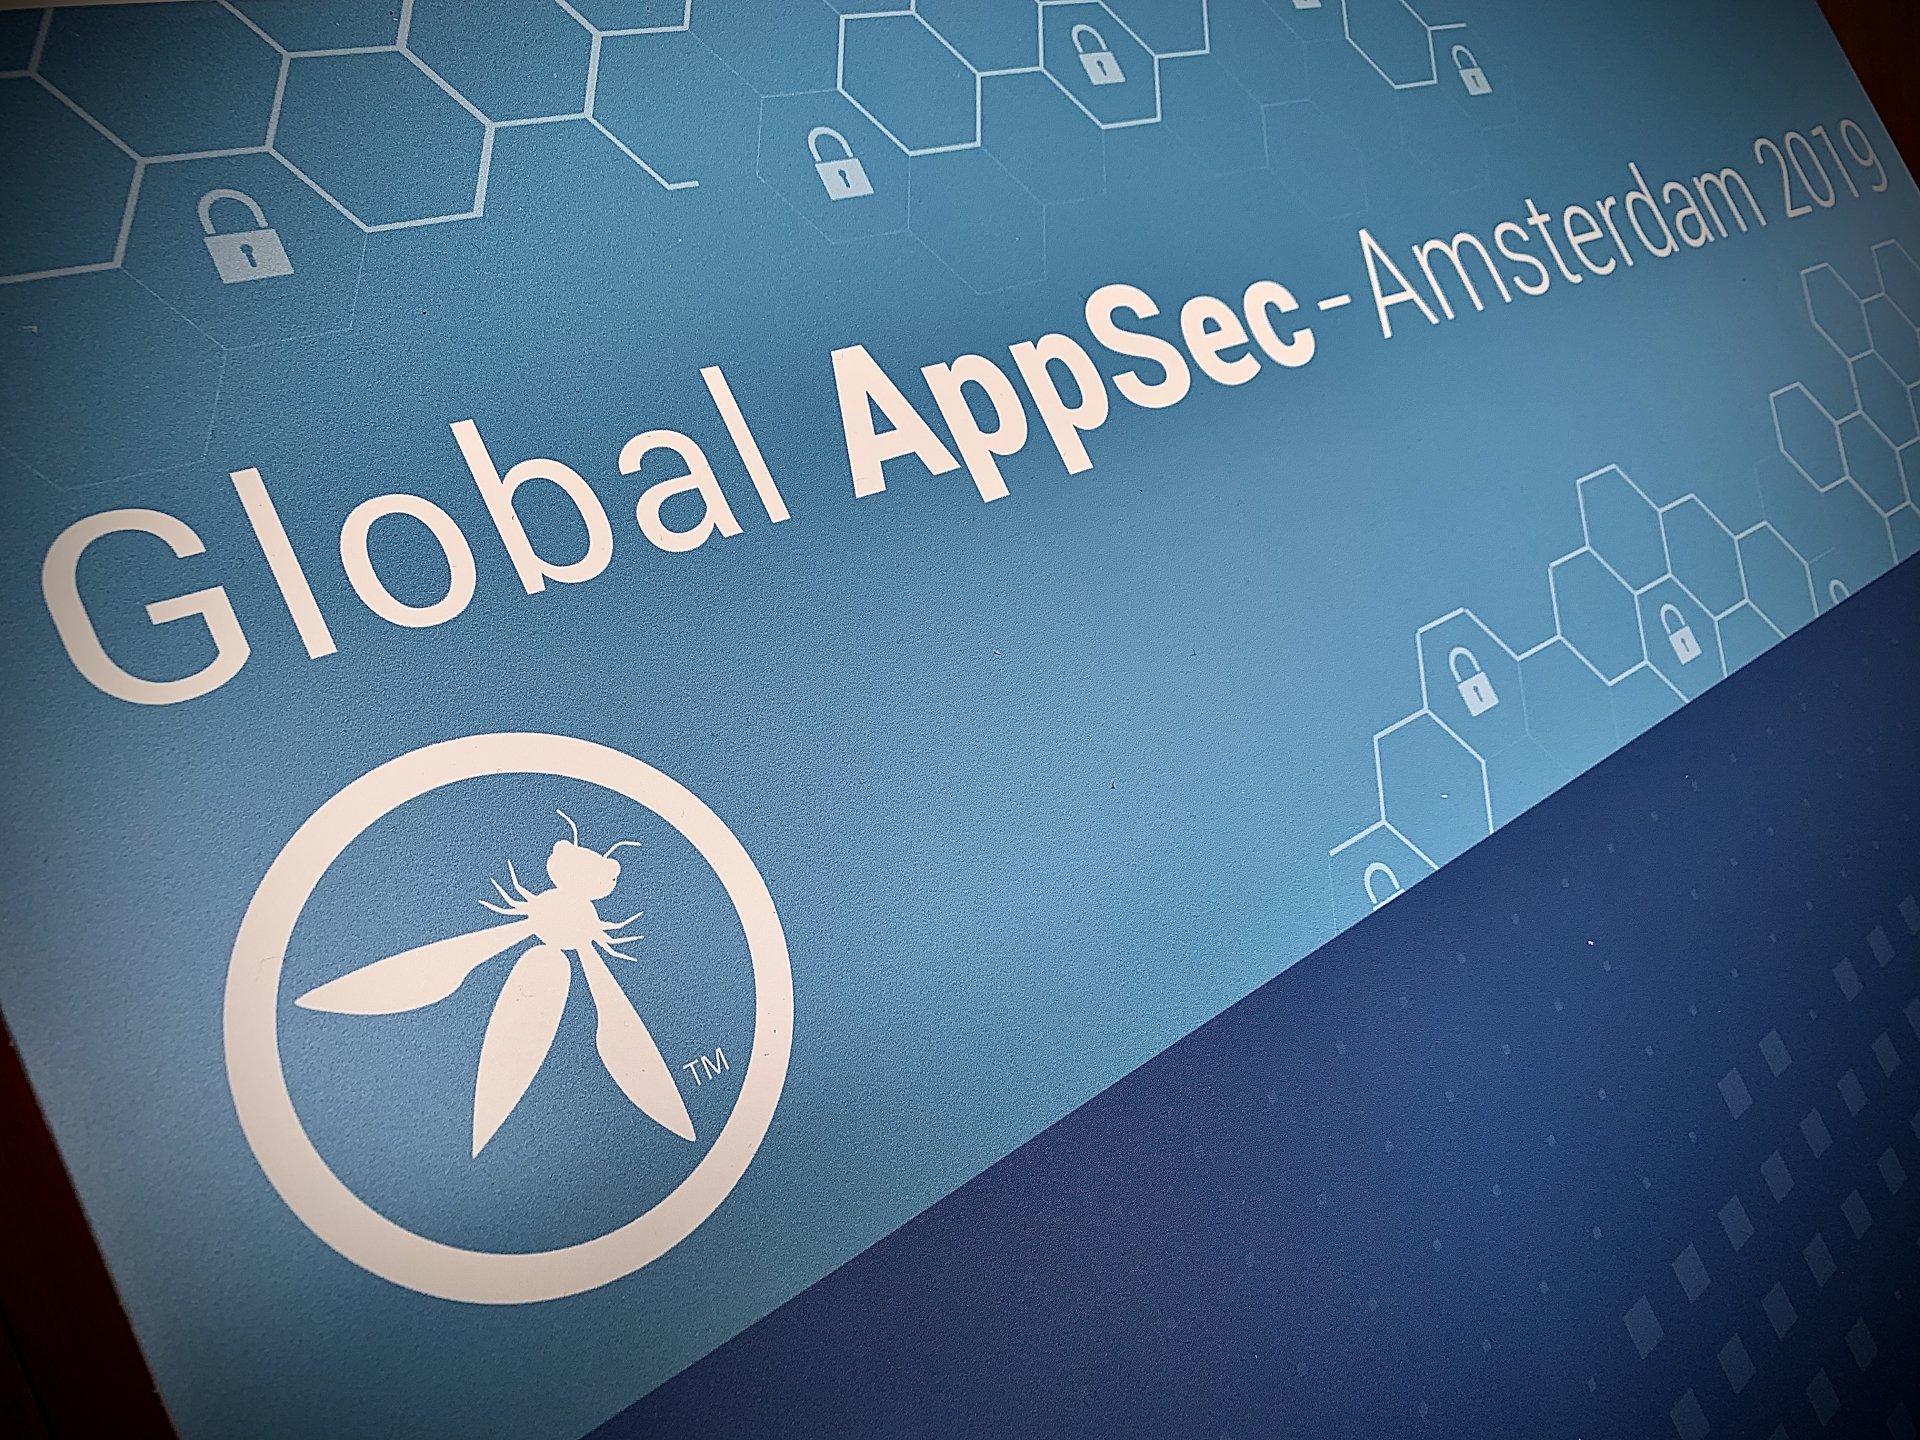 Visiting an international hackers conference OWASP Global AppSec